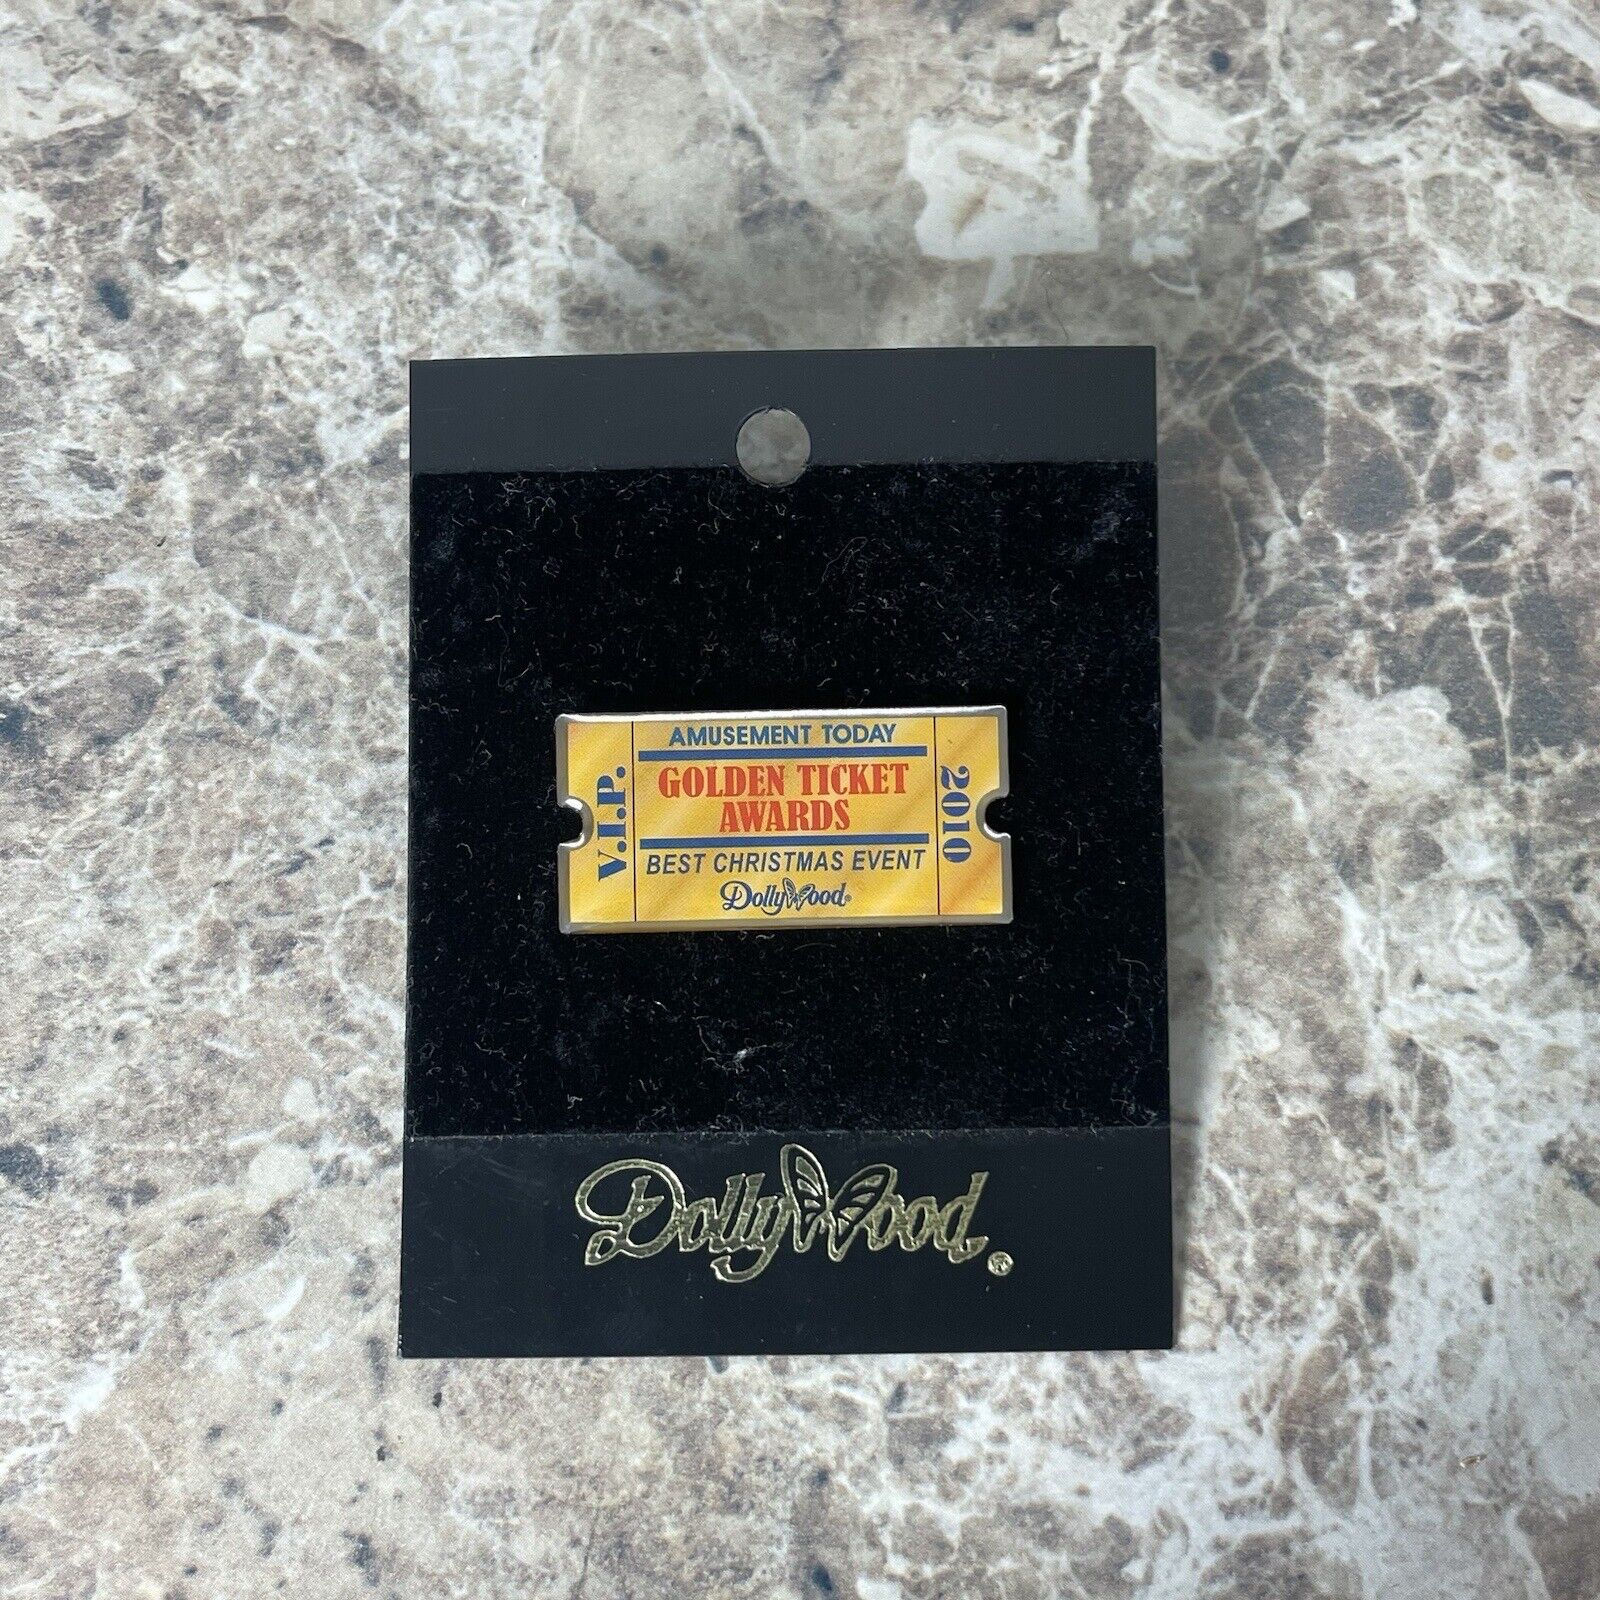 Rare 2010 DollyWood Collectors Golden Ticket Awards V.I.P. Best Christmas Ever